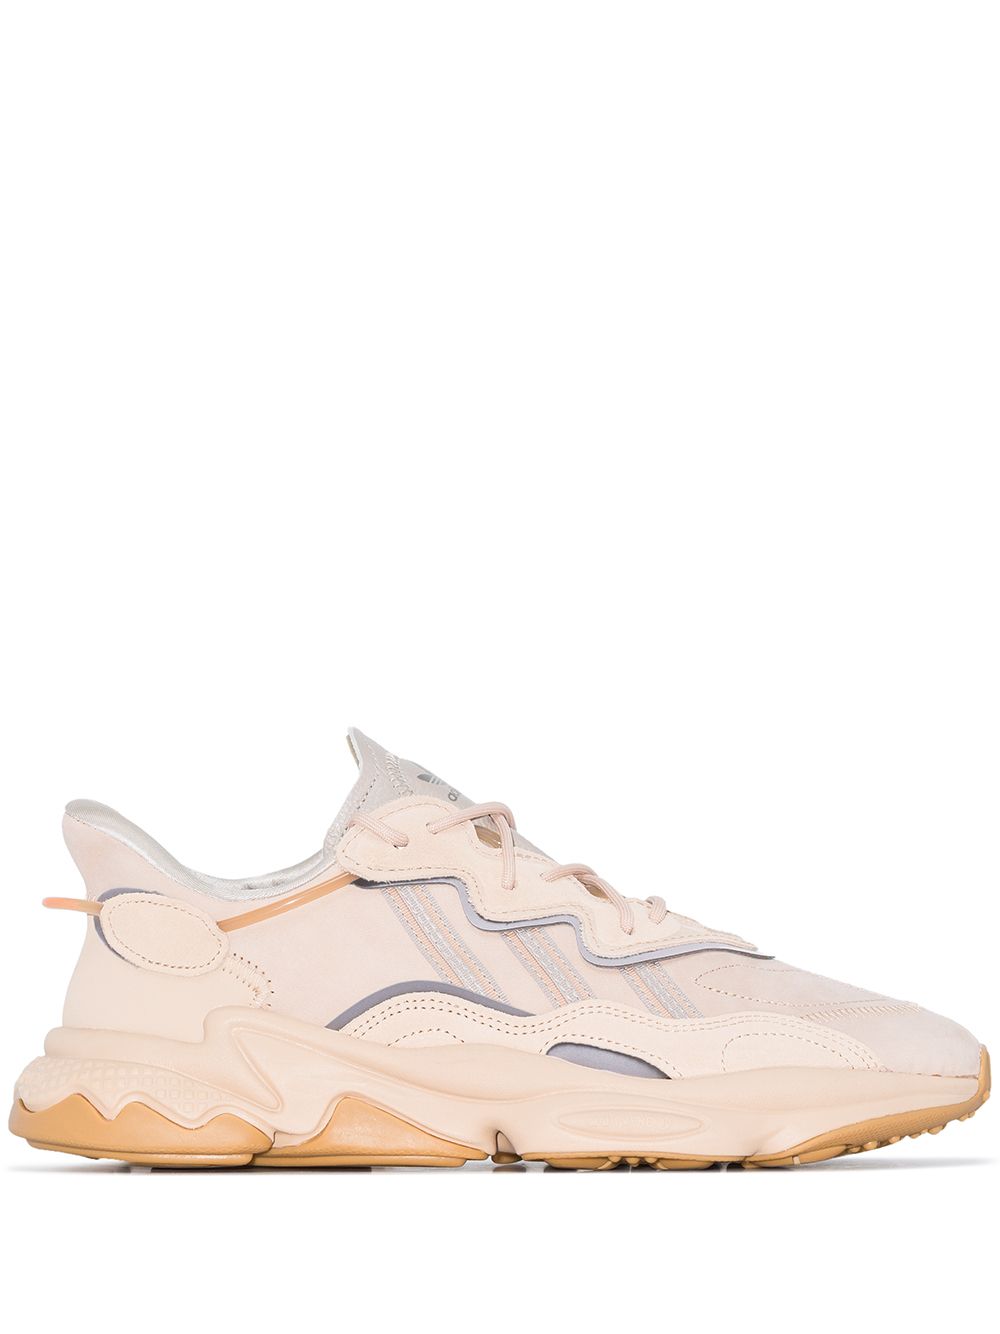 Adidas Originals Ozweego St. Pale Sneakers In Neutrals